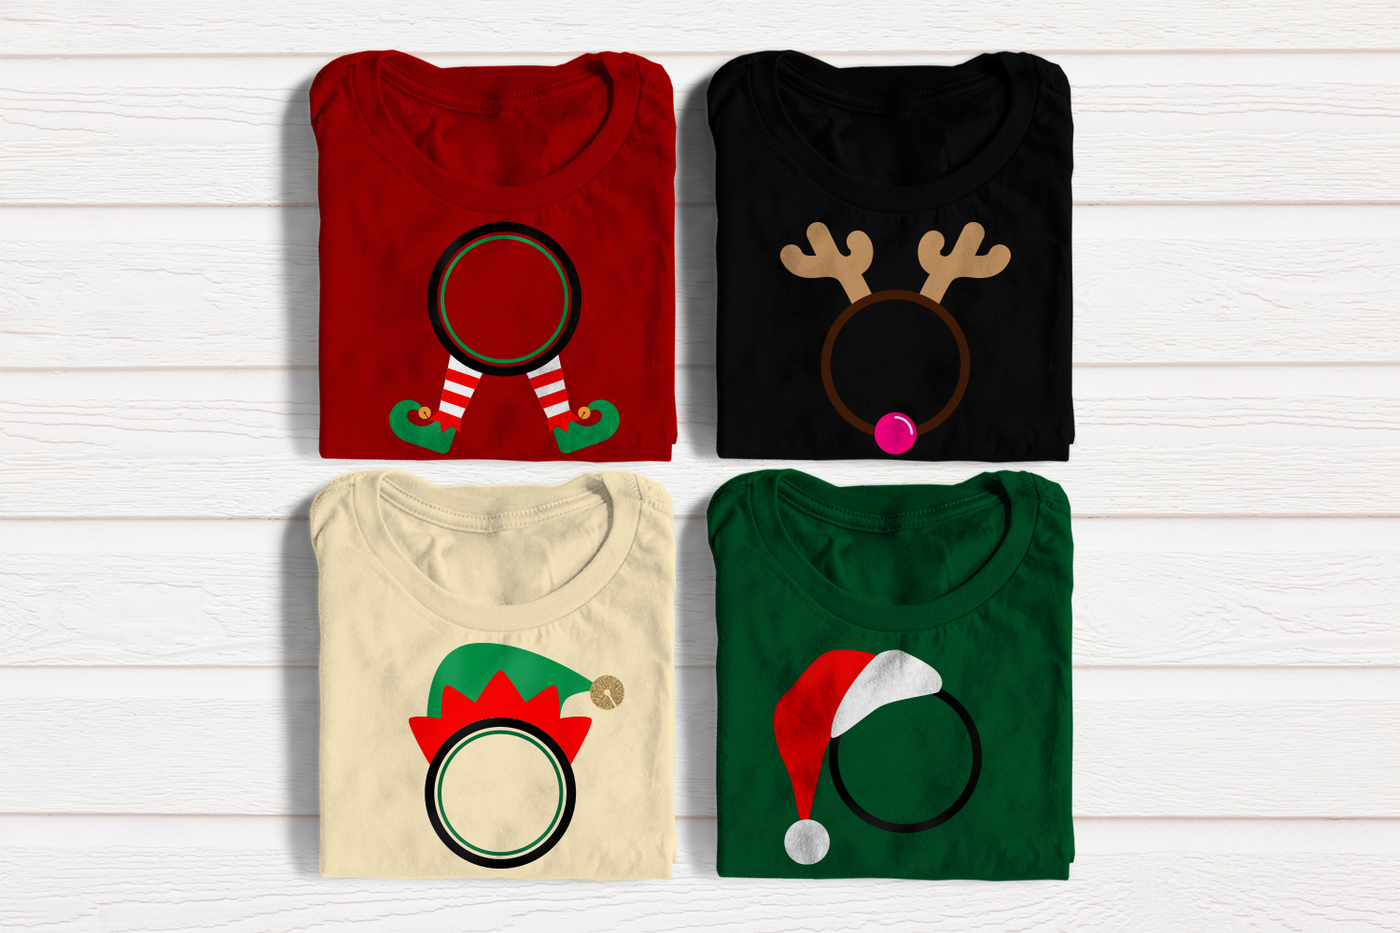 Four folded tees in Christmas colors. Each has a round monogram frame. The included frame designs are elf legs, an elf hat, reindeer horns and nose, and a Santa hat.